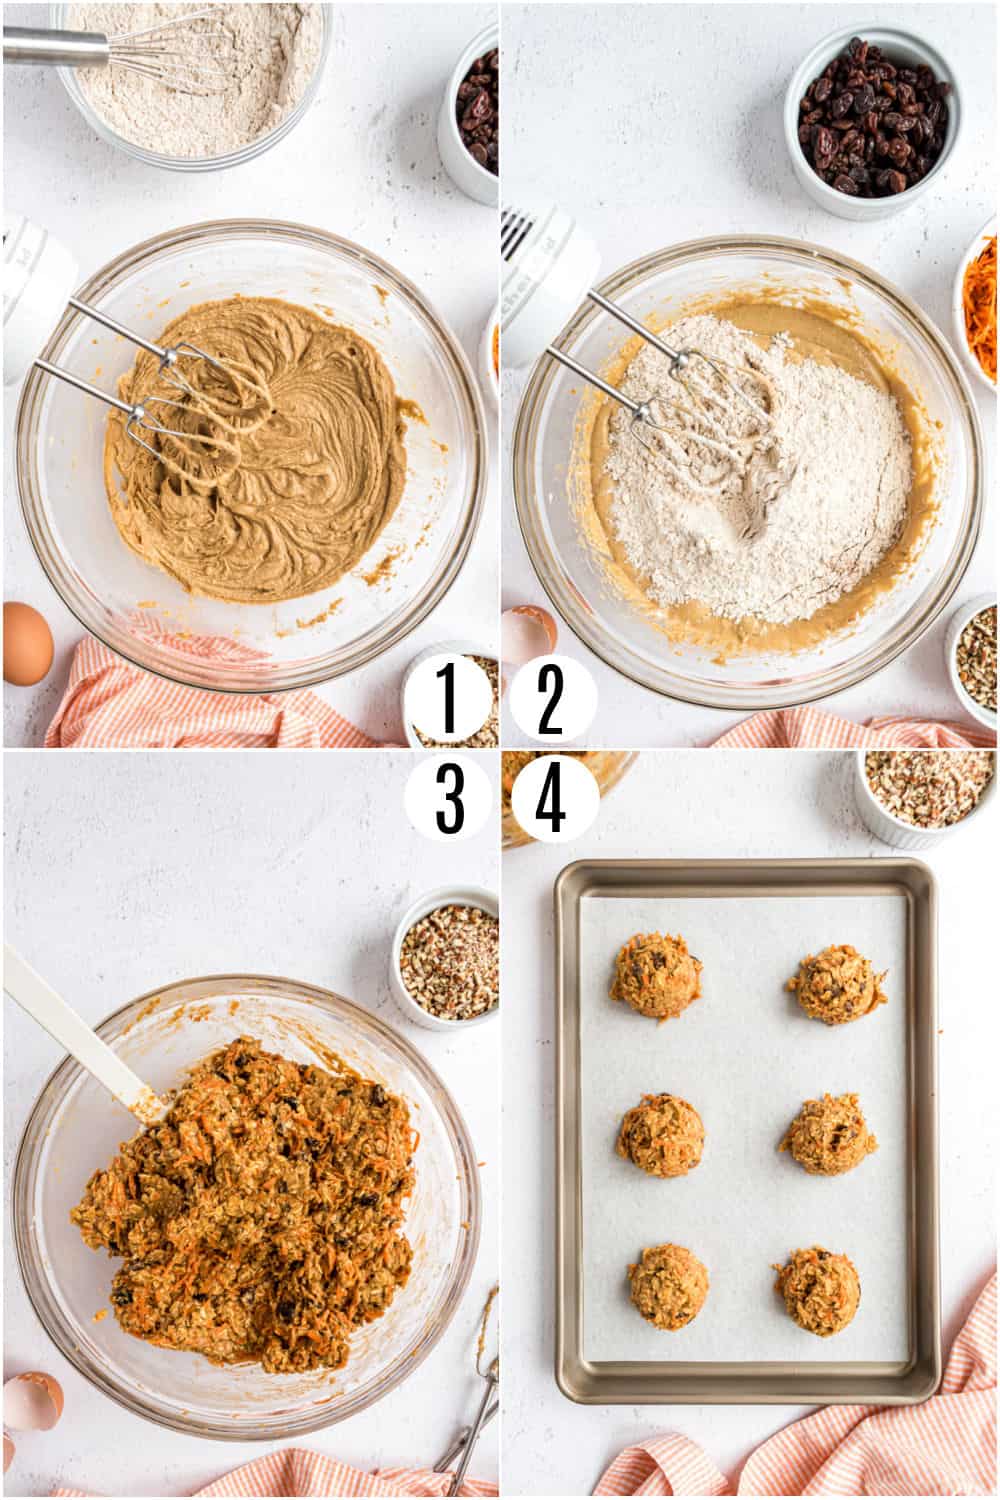 Step by step photos showing how to make carrot cake cookies.